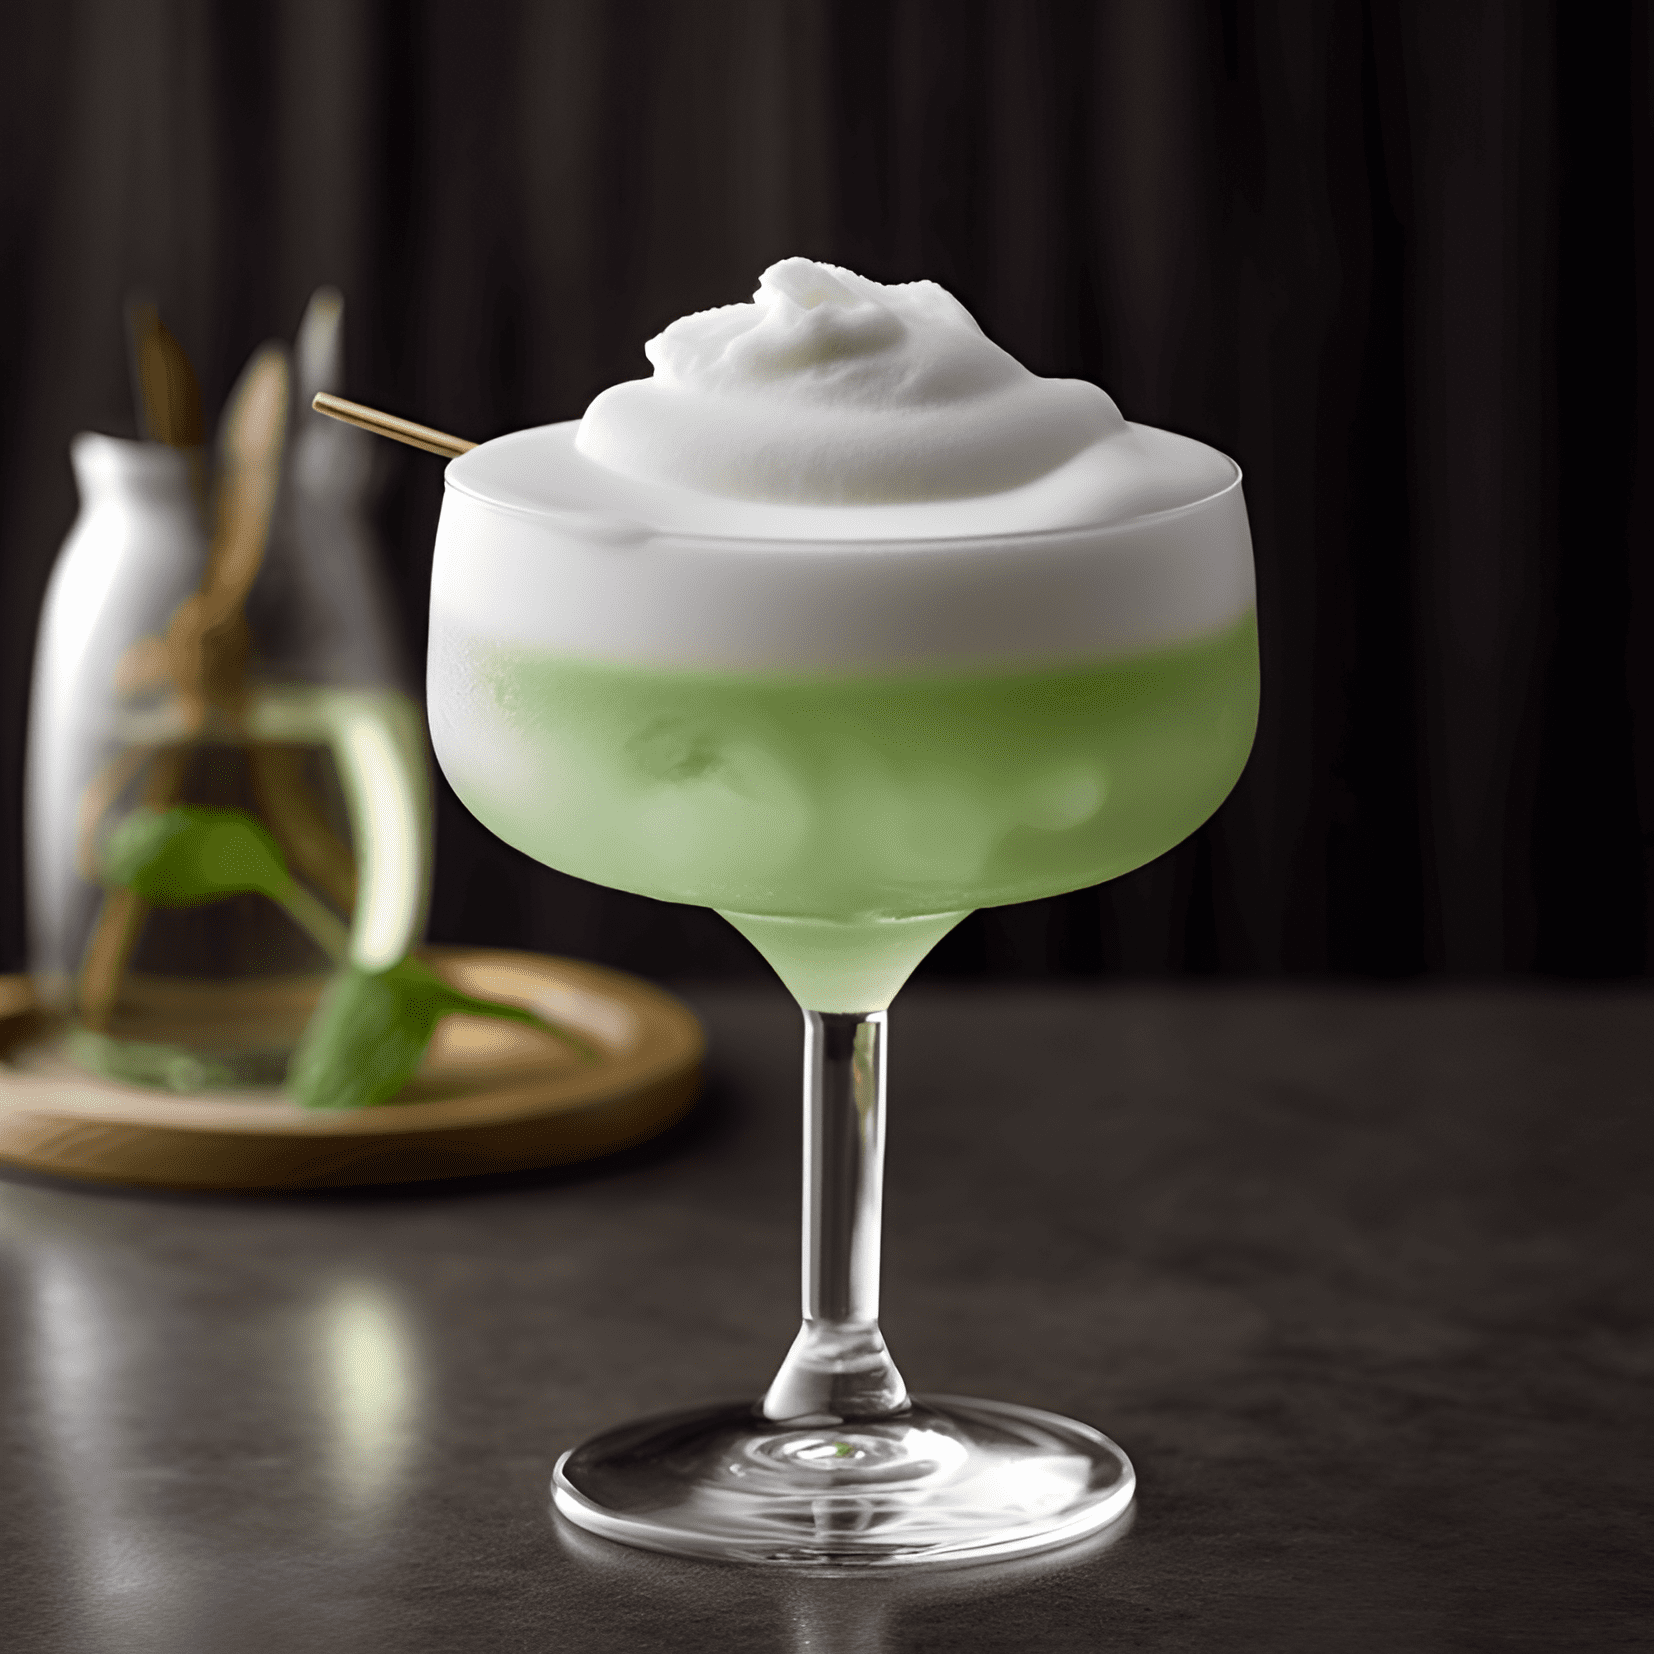 Mickey Slim Cocktail Recipe - The Mickey Slim has a complex taste, with a combination of sweet, sour, and bitter flavors. It is a strong and potent cocktail, with a smooth and velvety texture.